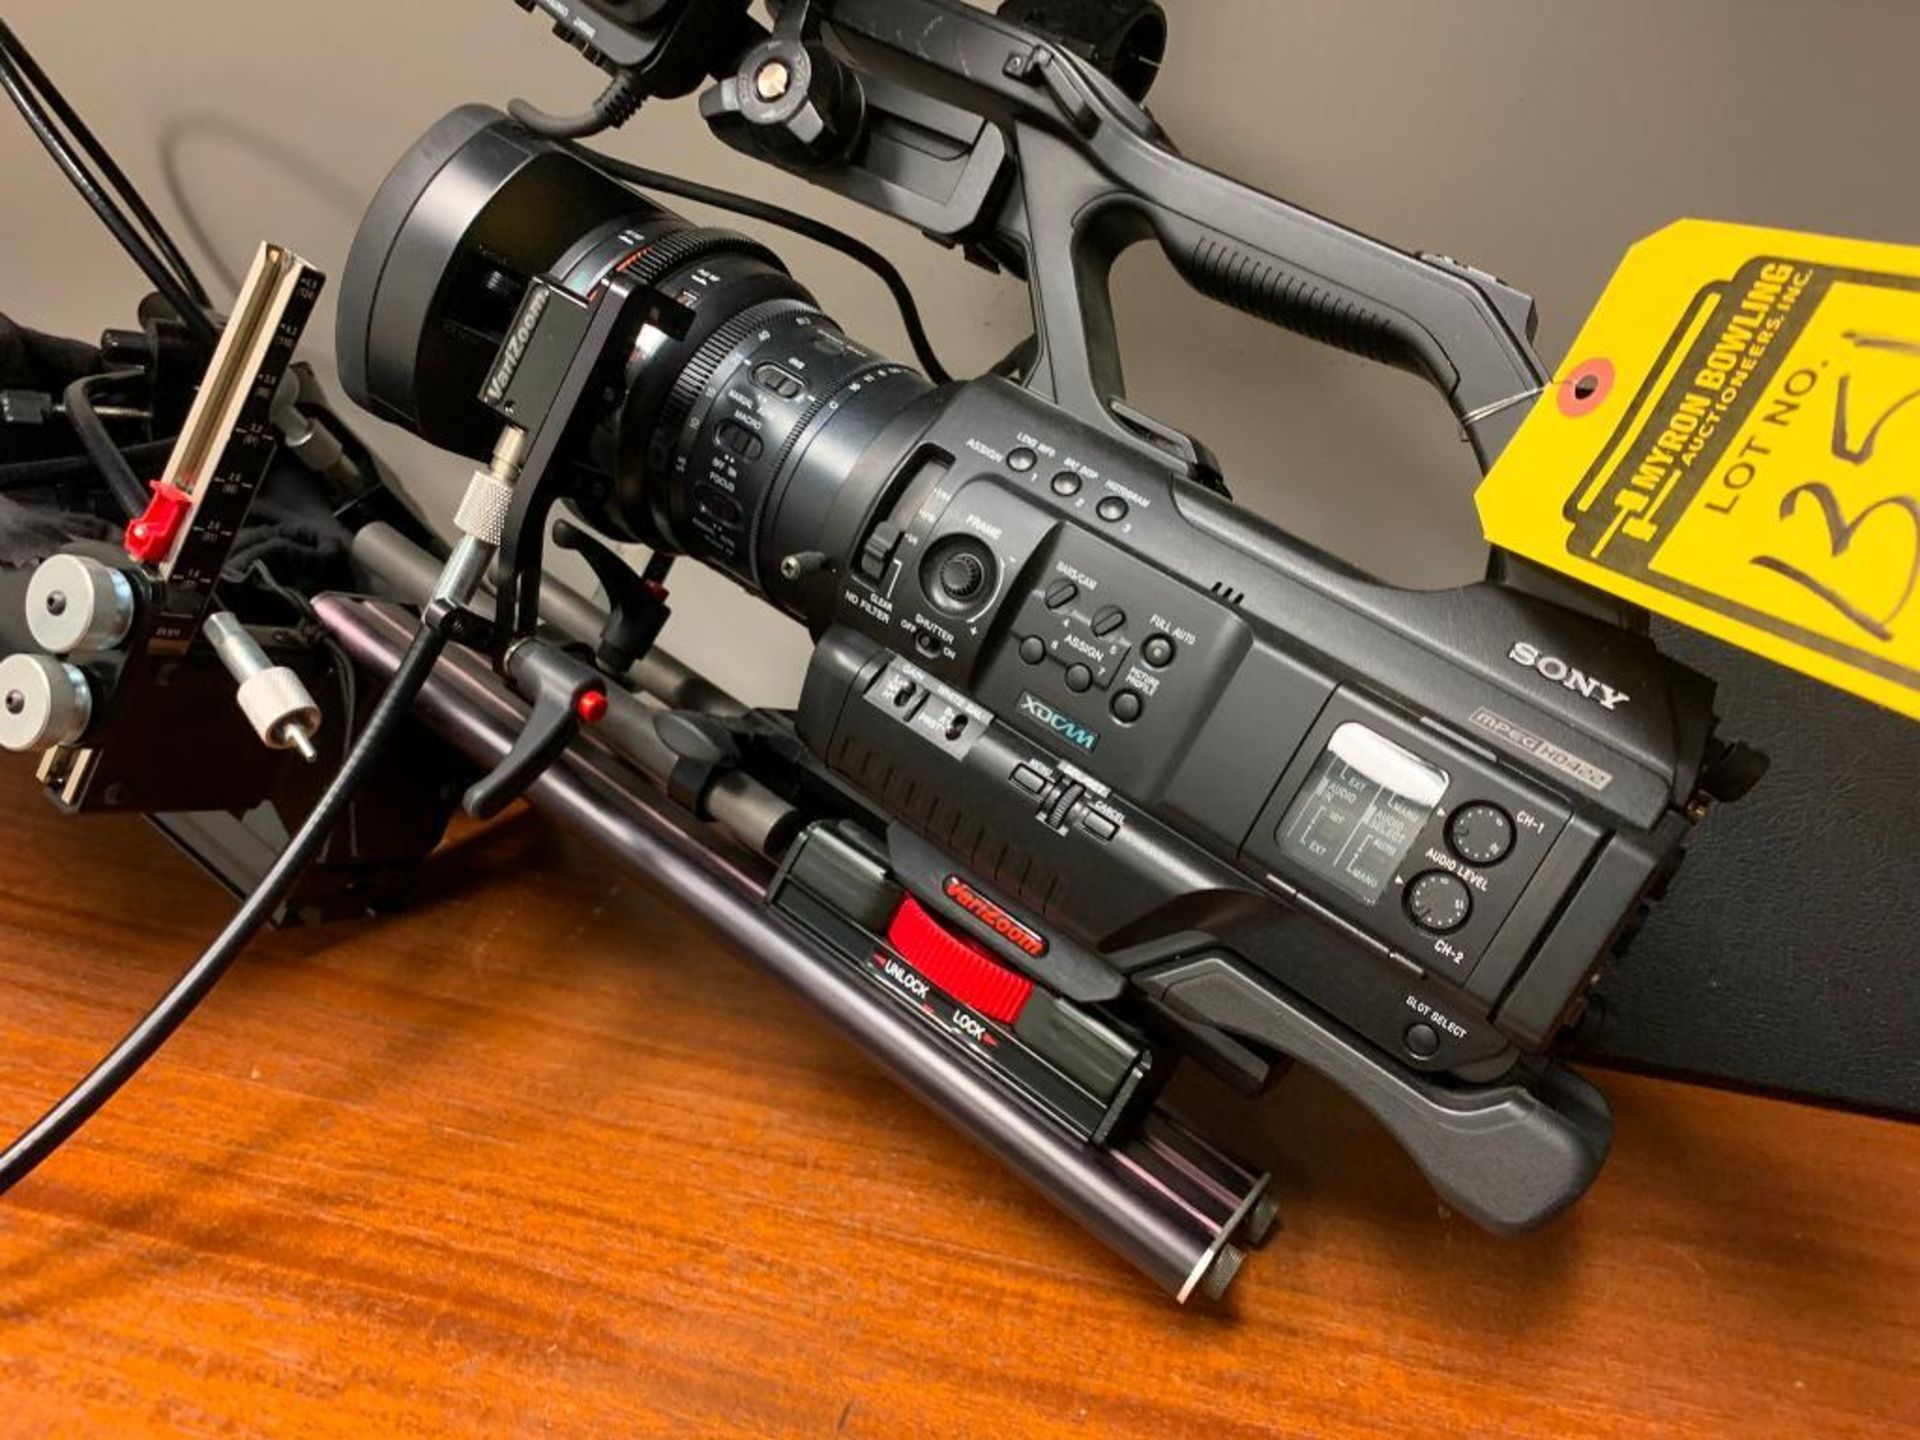 Sony XD Cam Video Recorder, Full HD 3CMOS, w/ Prompter Screen - Image 2 of 4